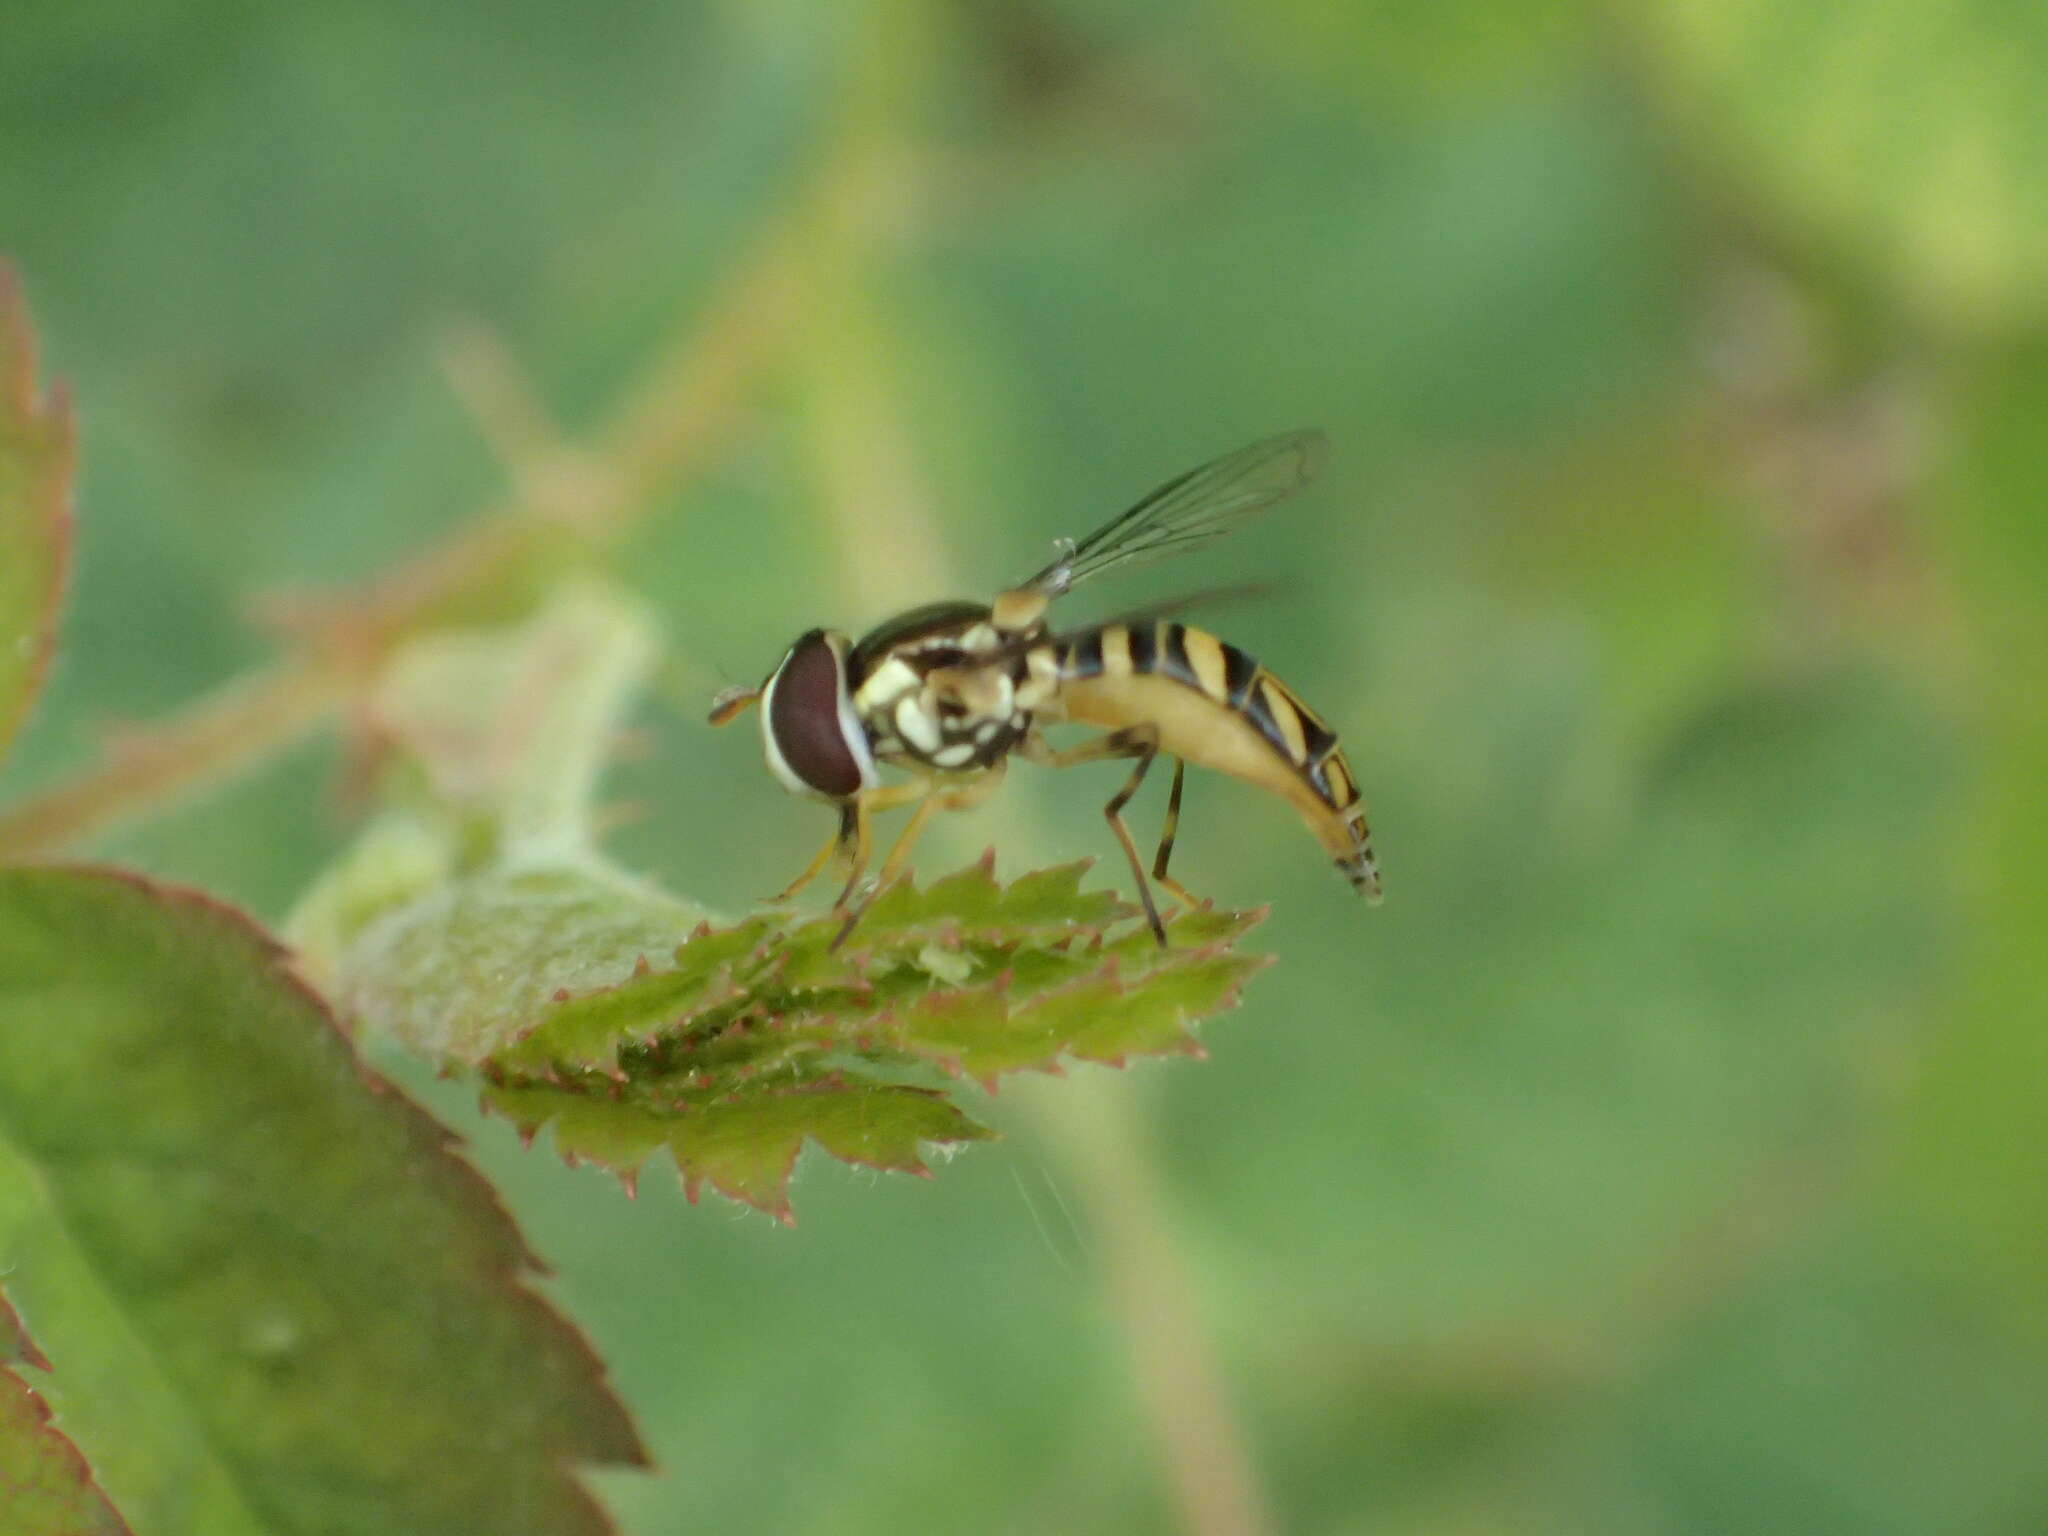 Image of Common Oblique Syrphid